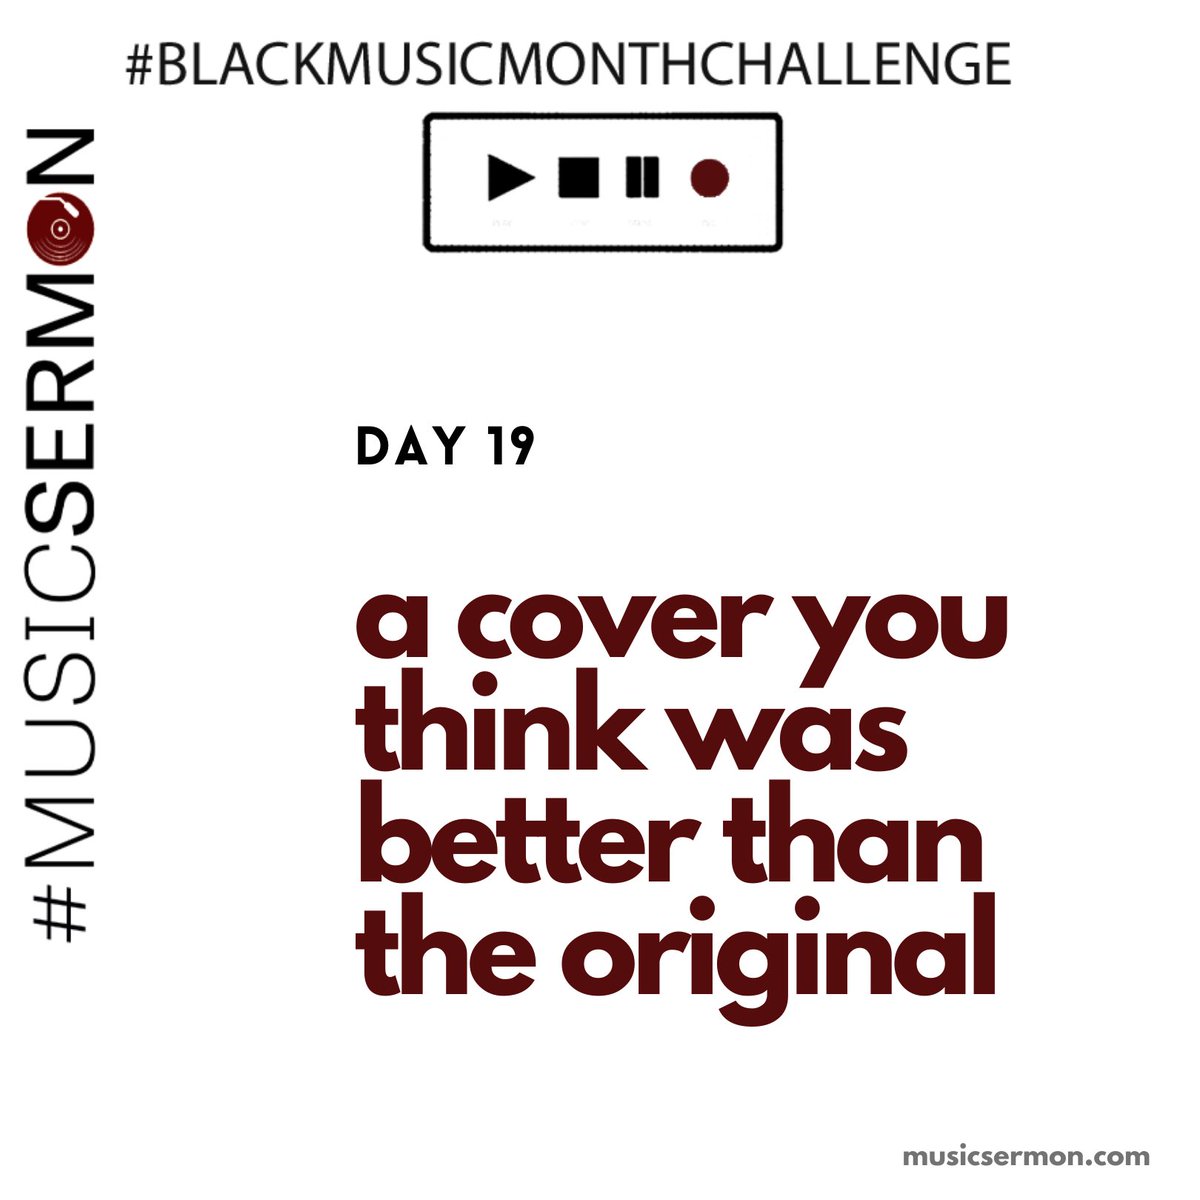 We have now entered the “Let’s argue” portion of the  #BlackMusicMonthChallenge (yay!)We’ll start easy: For Day 19, share a cover you think was better than the origional.